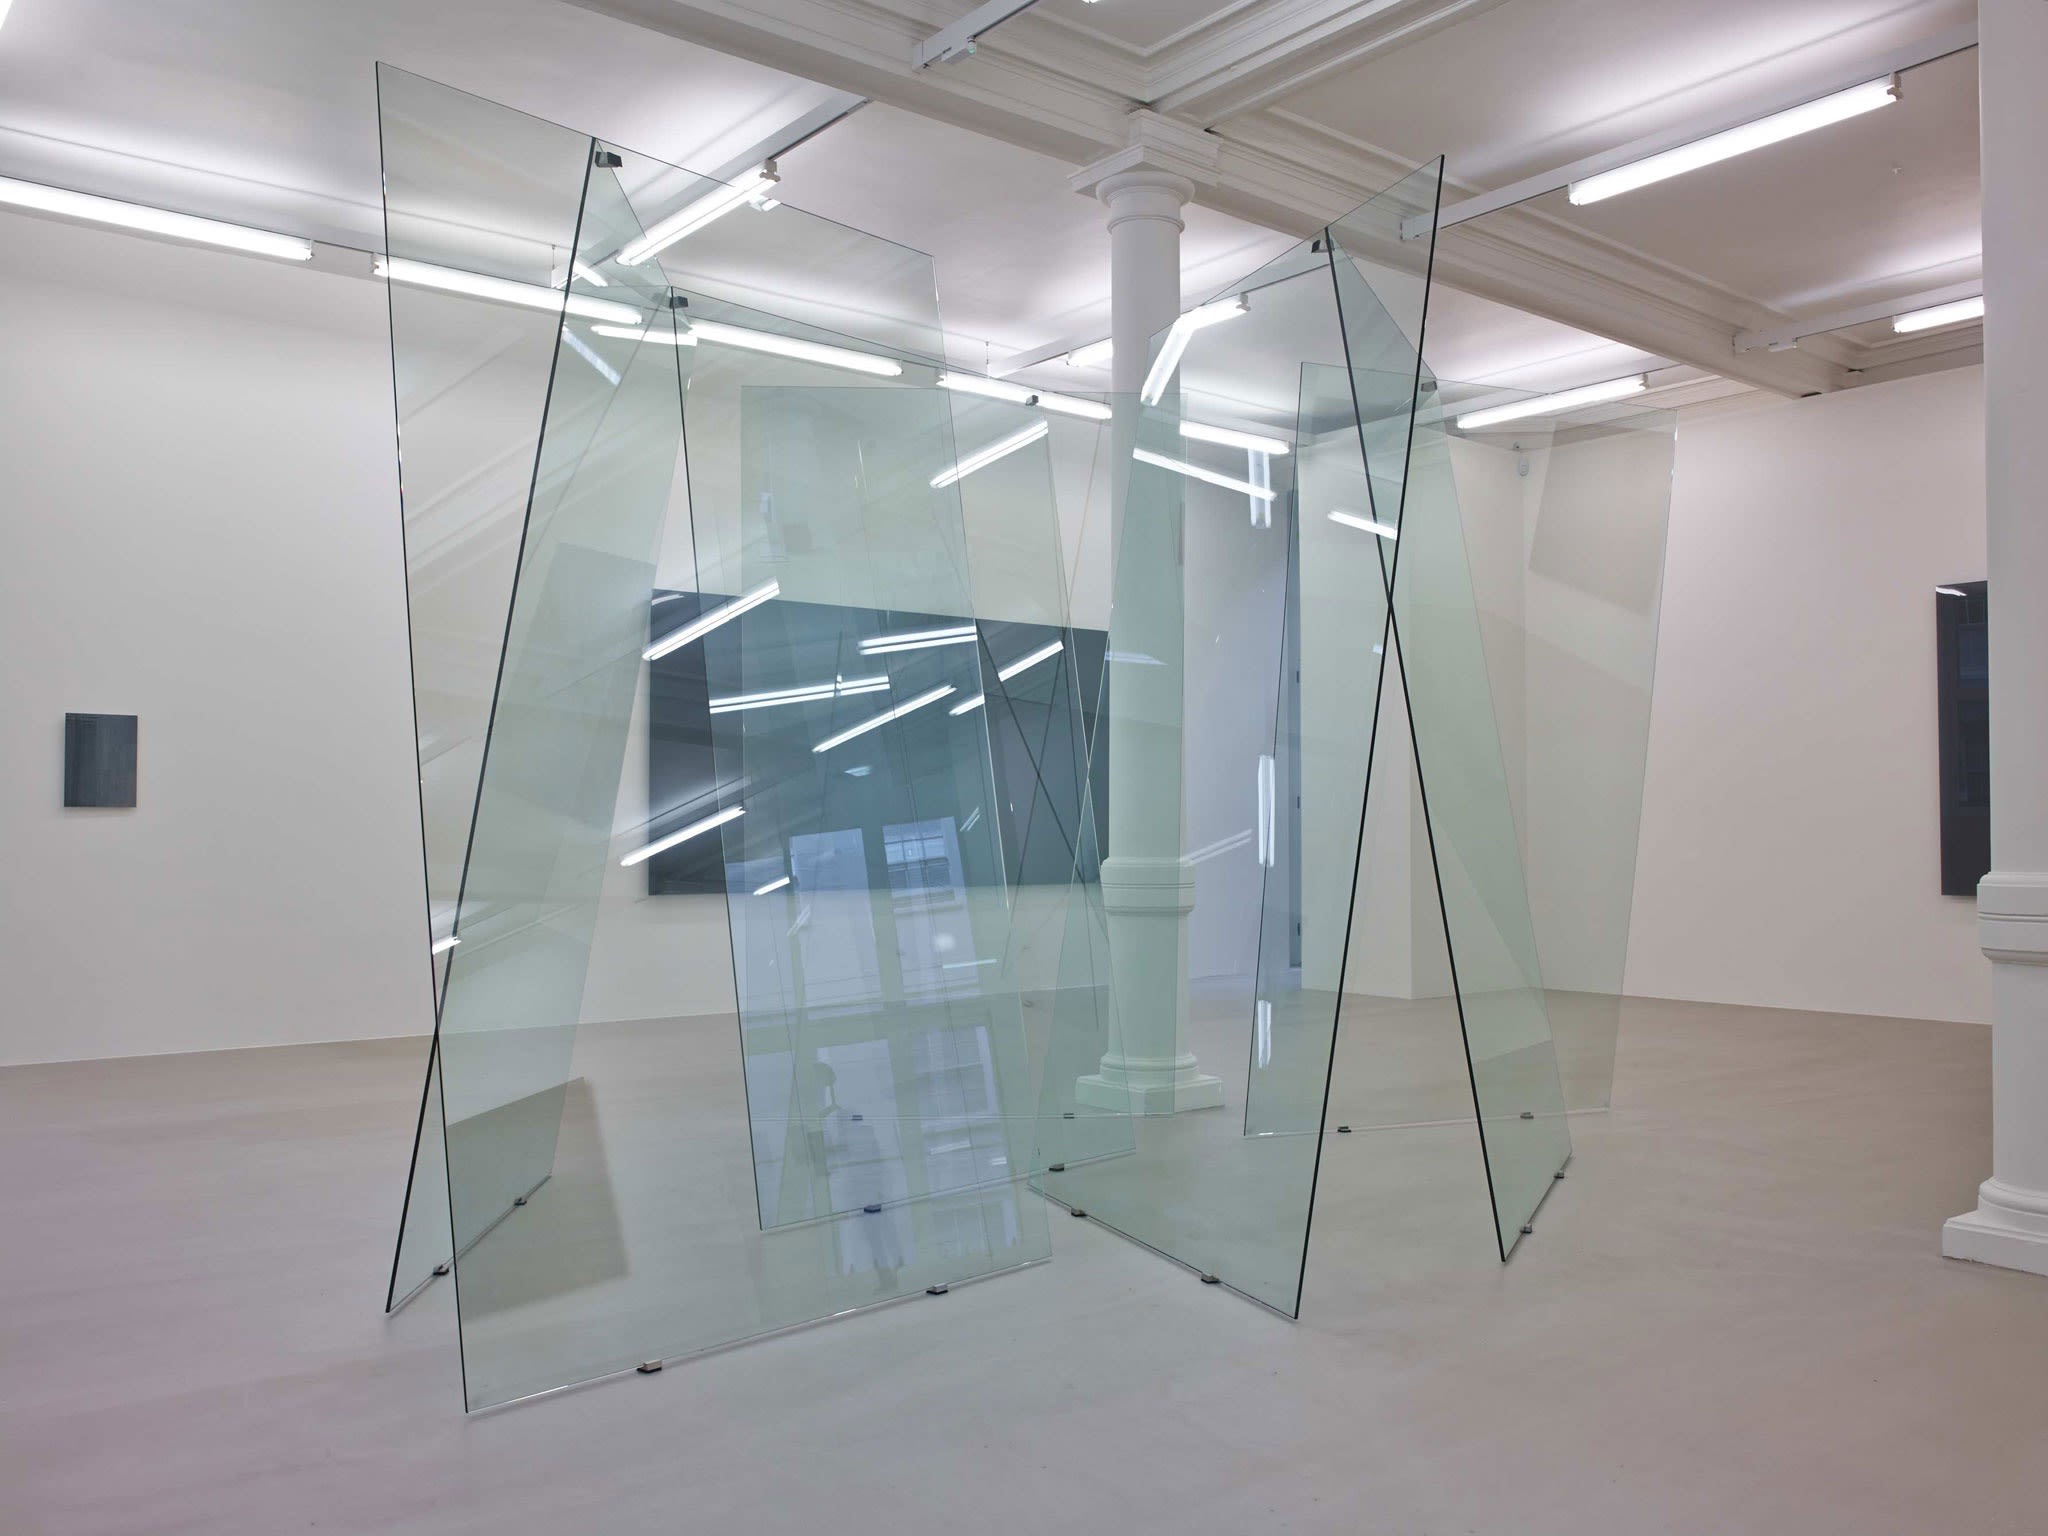 In a large white space with columns and many windows, several glass planes lean on each other unevenly, making a large sculpture.